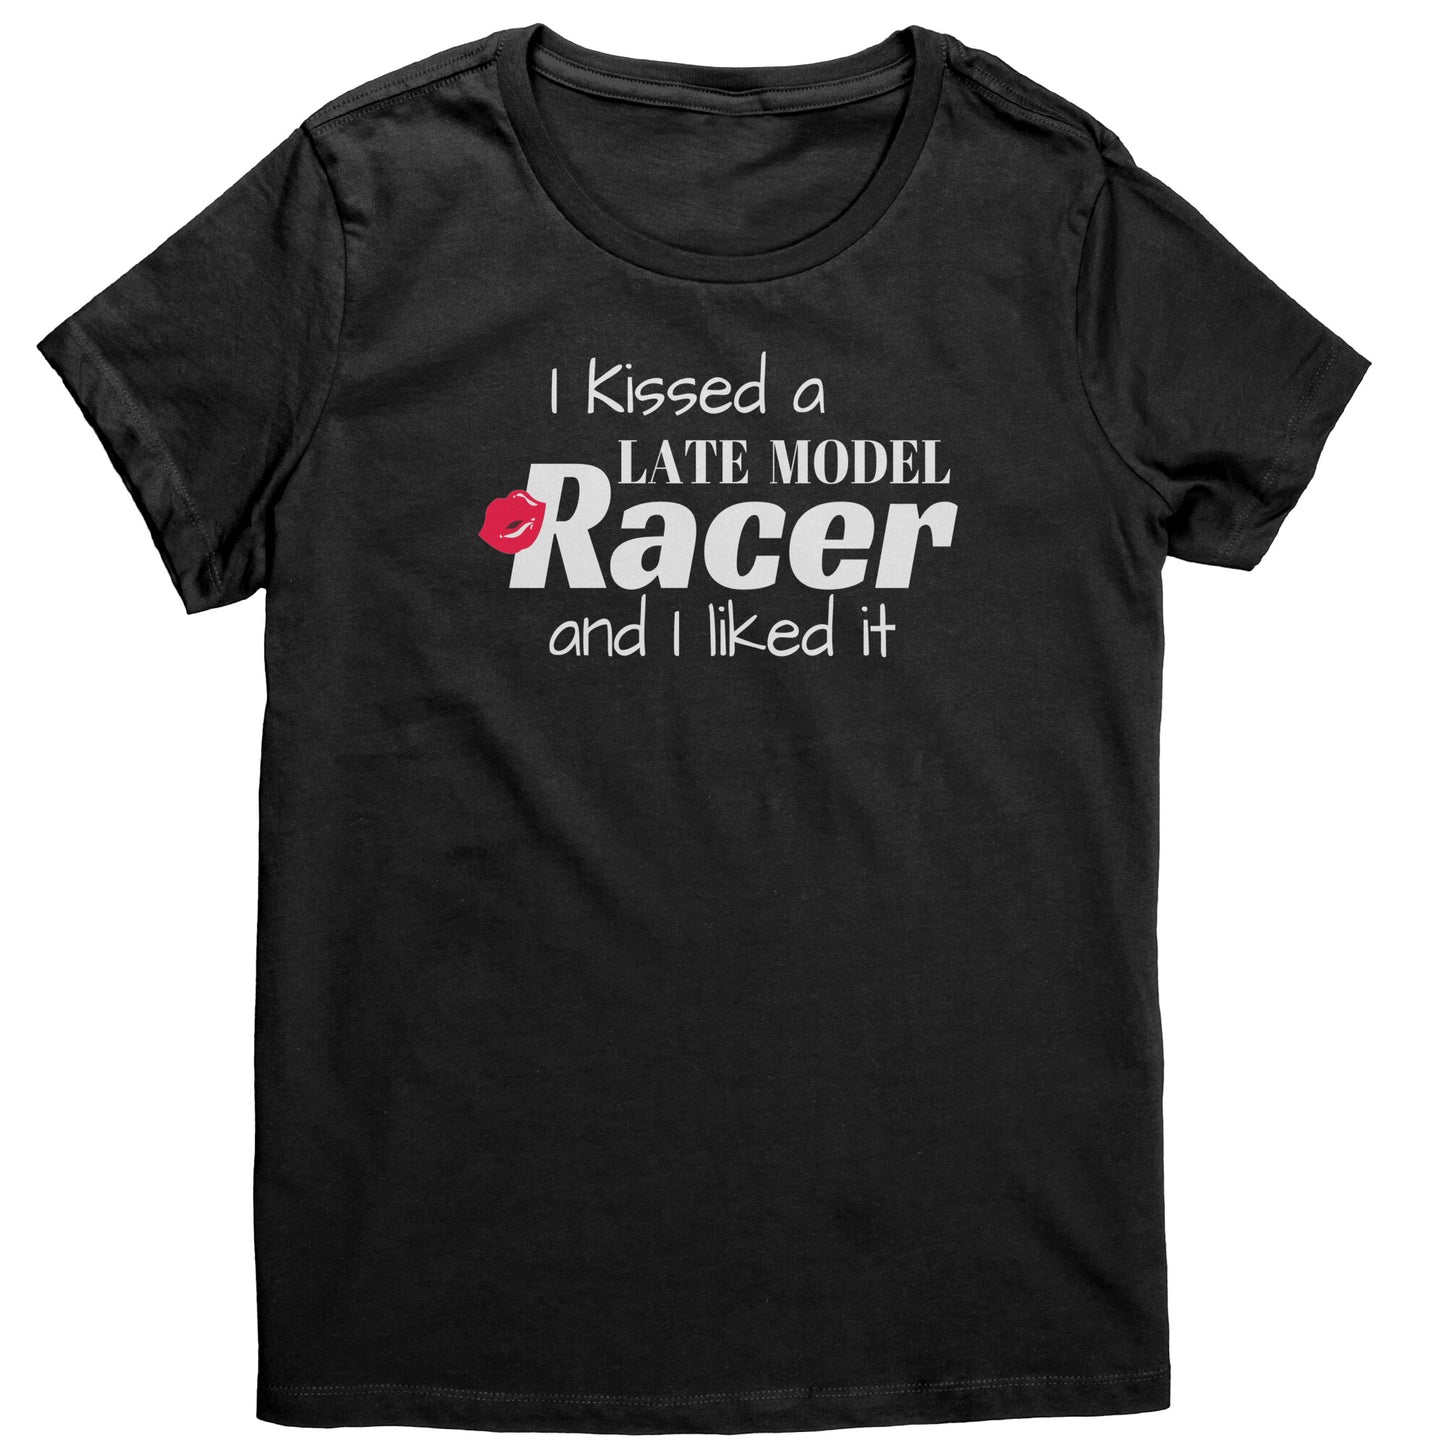 I Kissed a Late Model Racer And I Liked It Women's T-Shirt